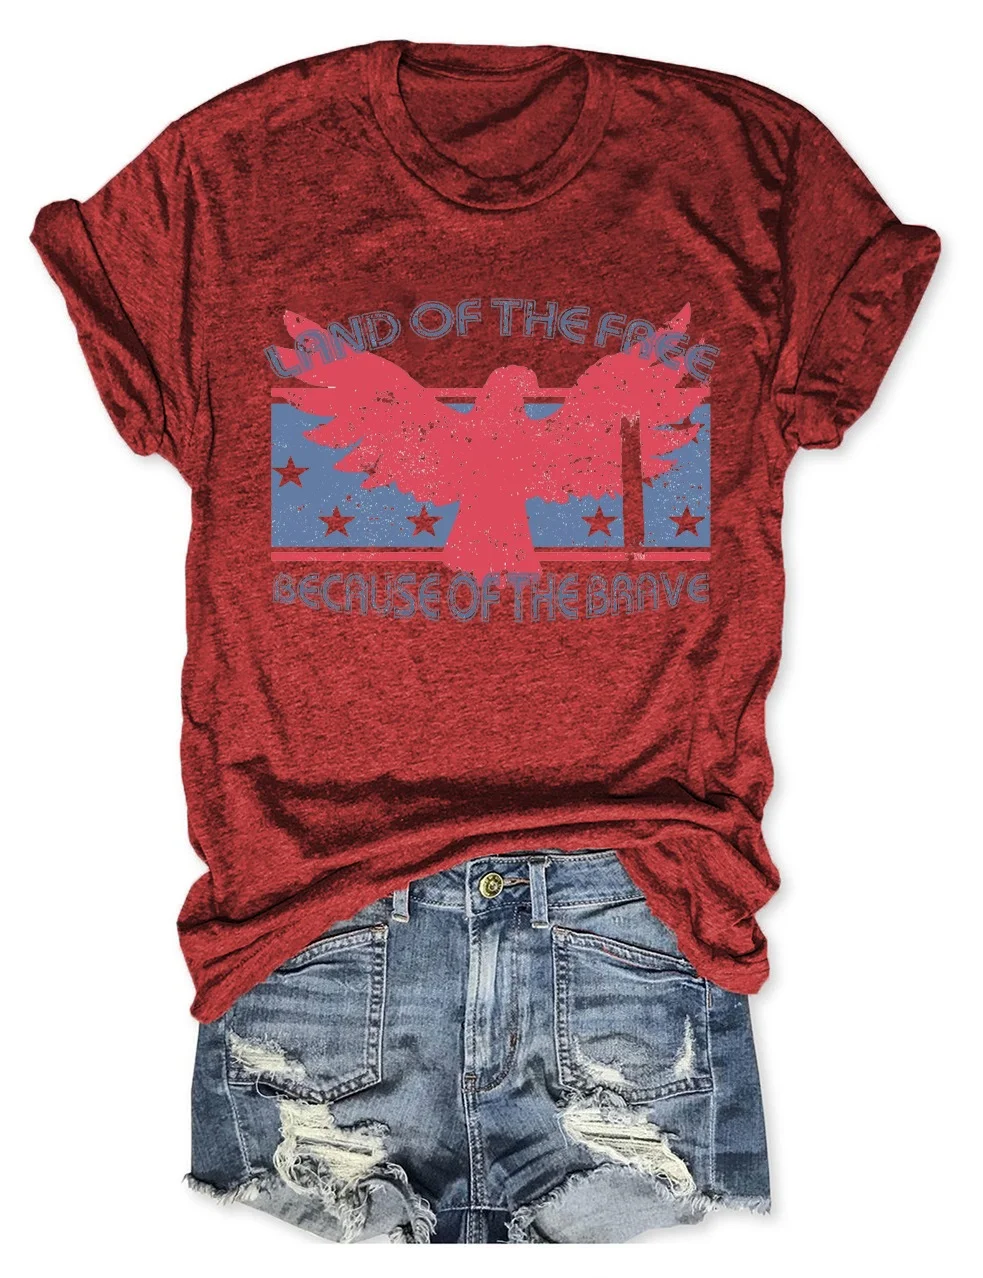 Land of the Free Because of the Brave T-Shirt